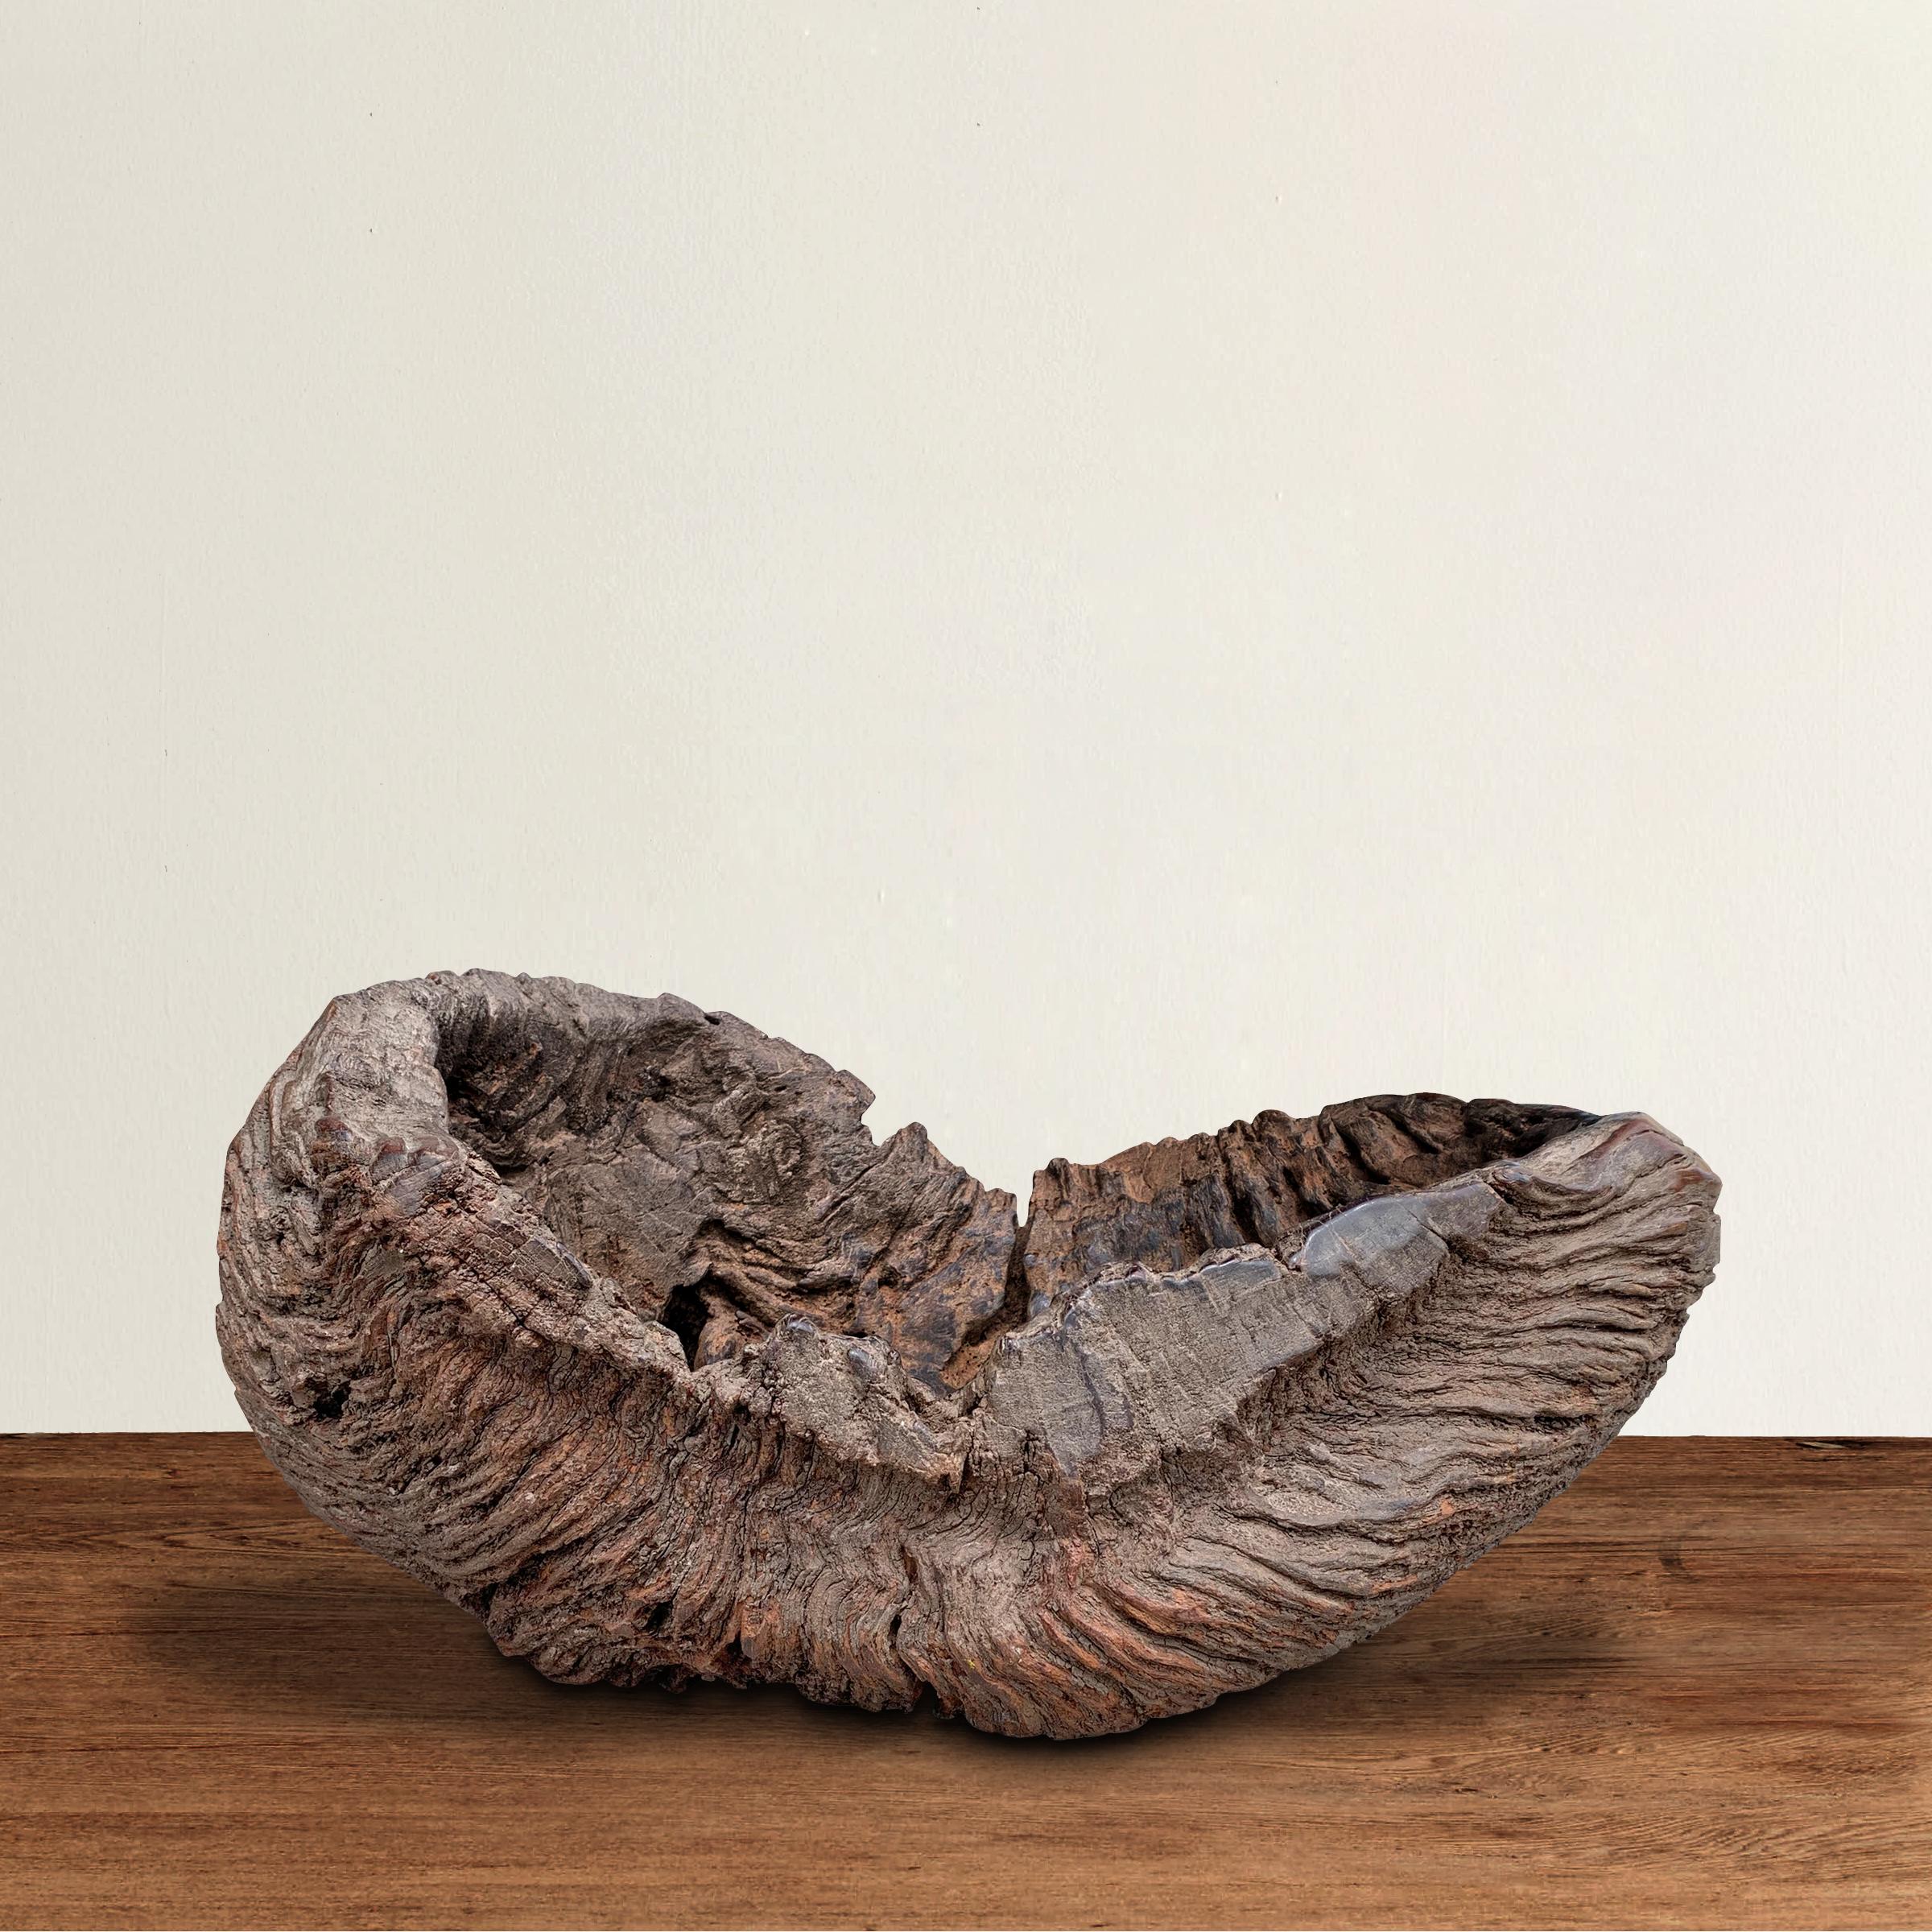 An incredible massive burl wood bowl of unbelievable sculptural form with a beautiful texture and a well worn finish only time can bestow. We don't know where this bowl came from, or what its story is, but who cares! It's bloody fantastic!